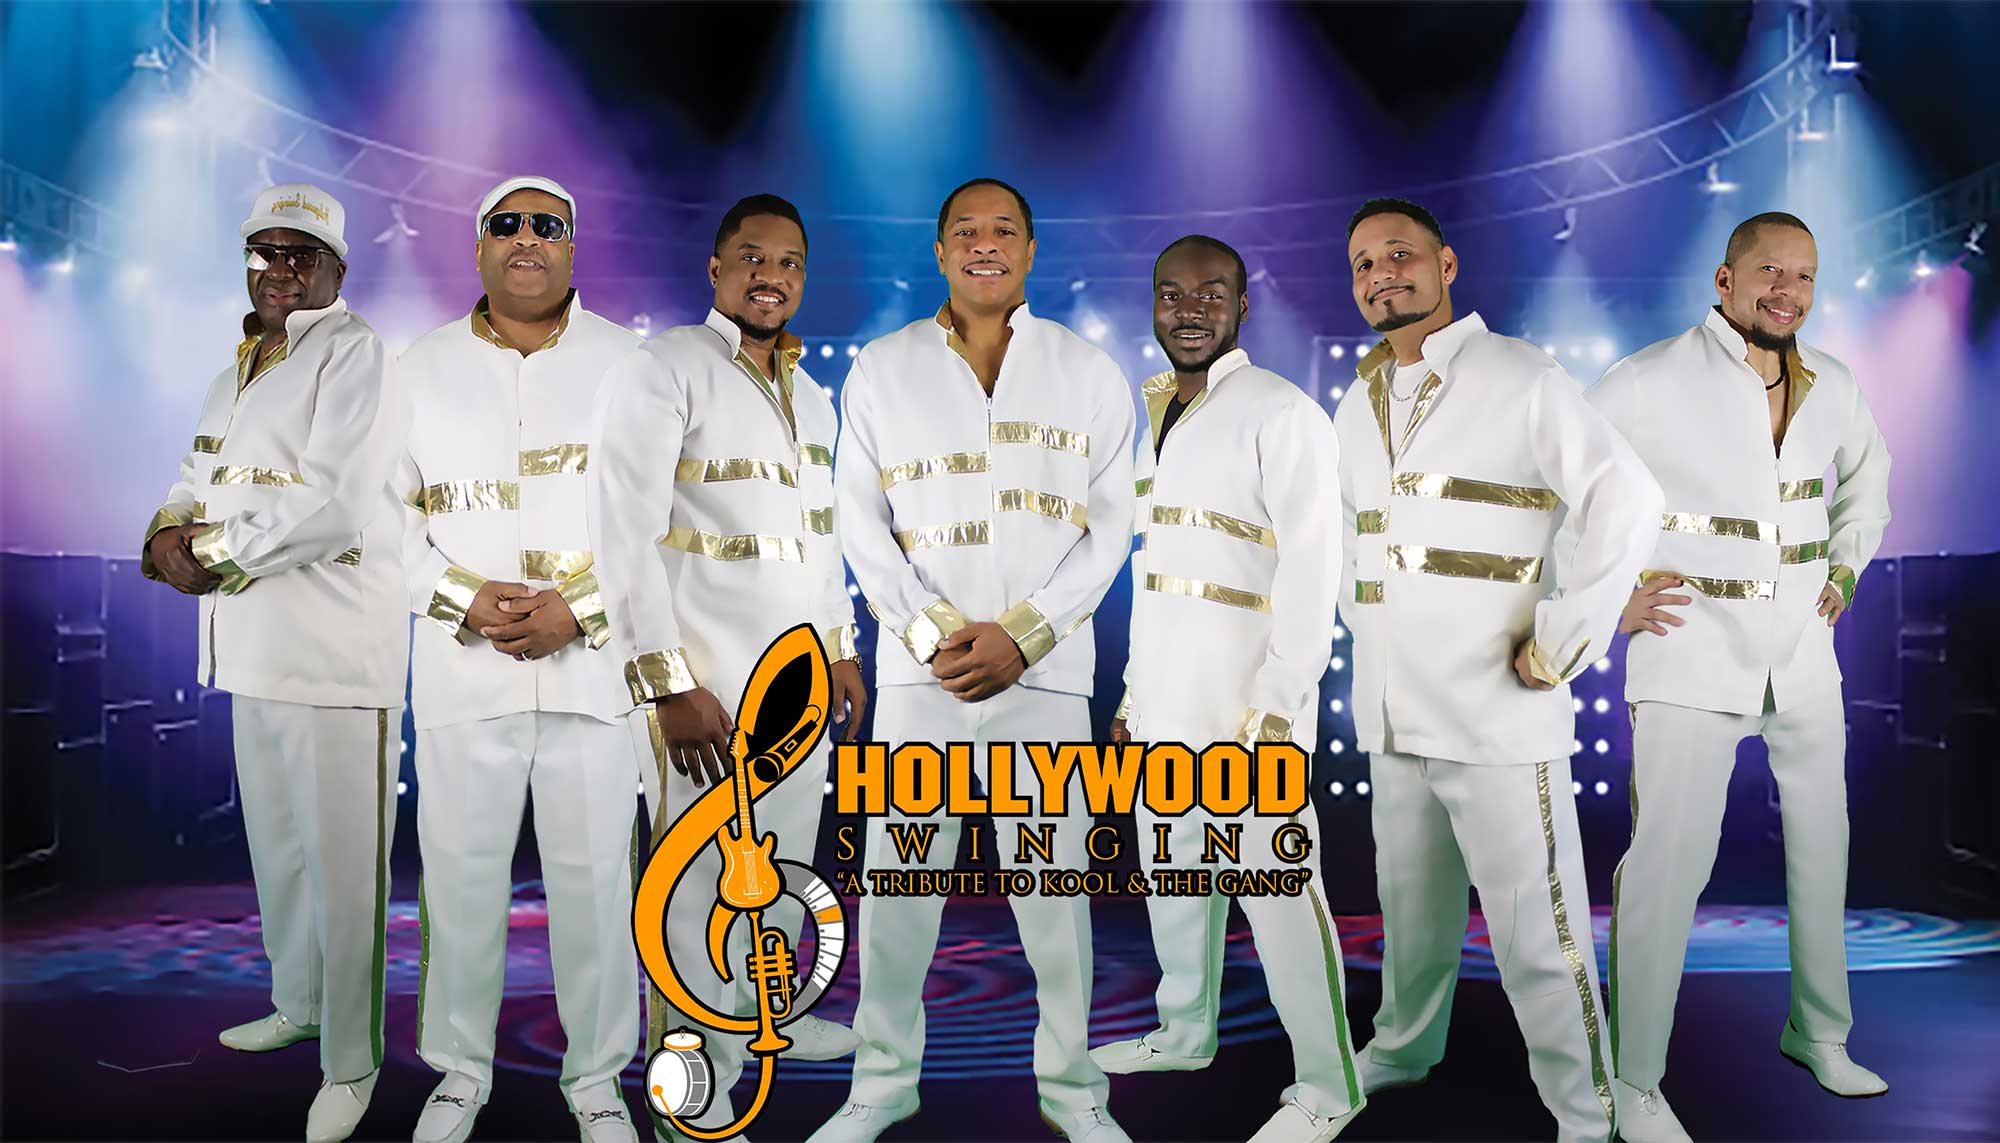 Members of Hollywood Swinging, a tribute band to Kool & the Gang.